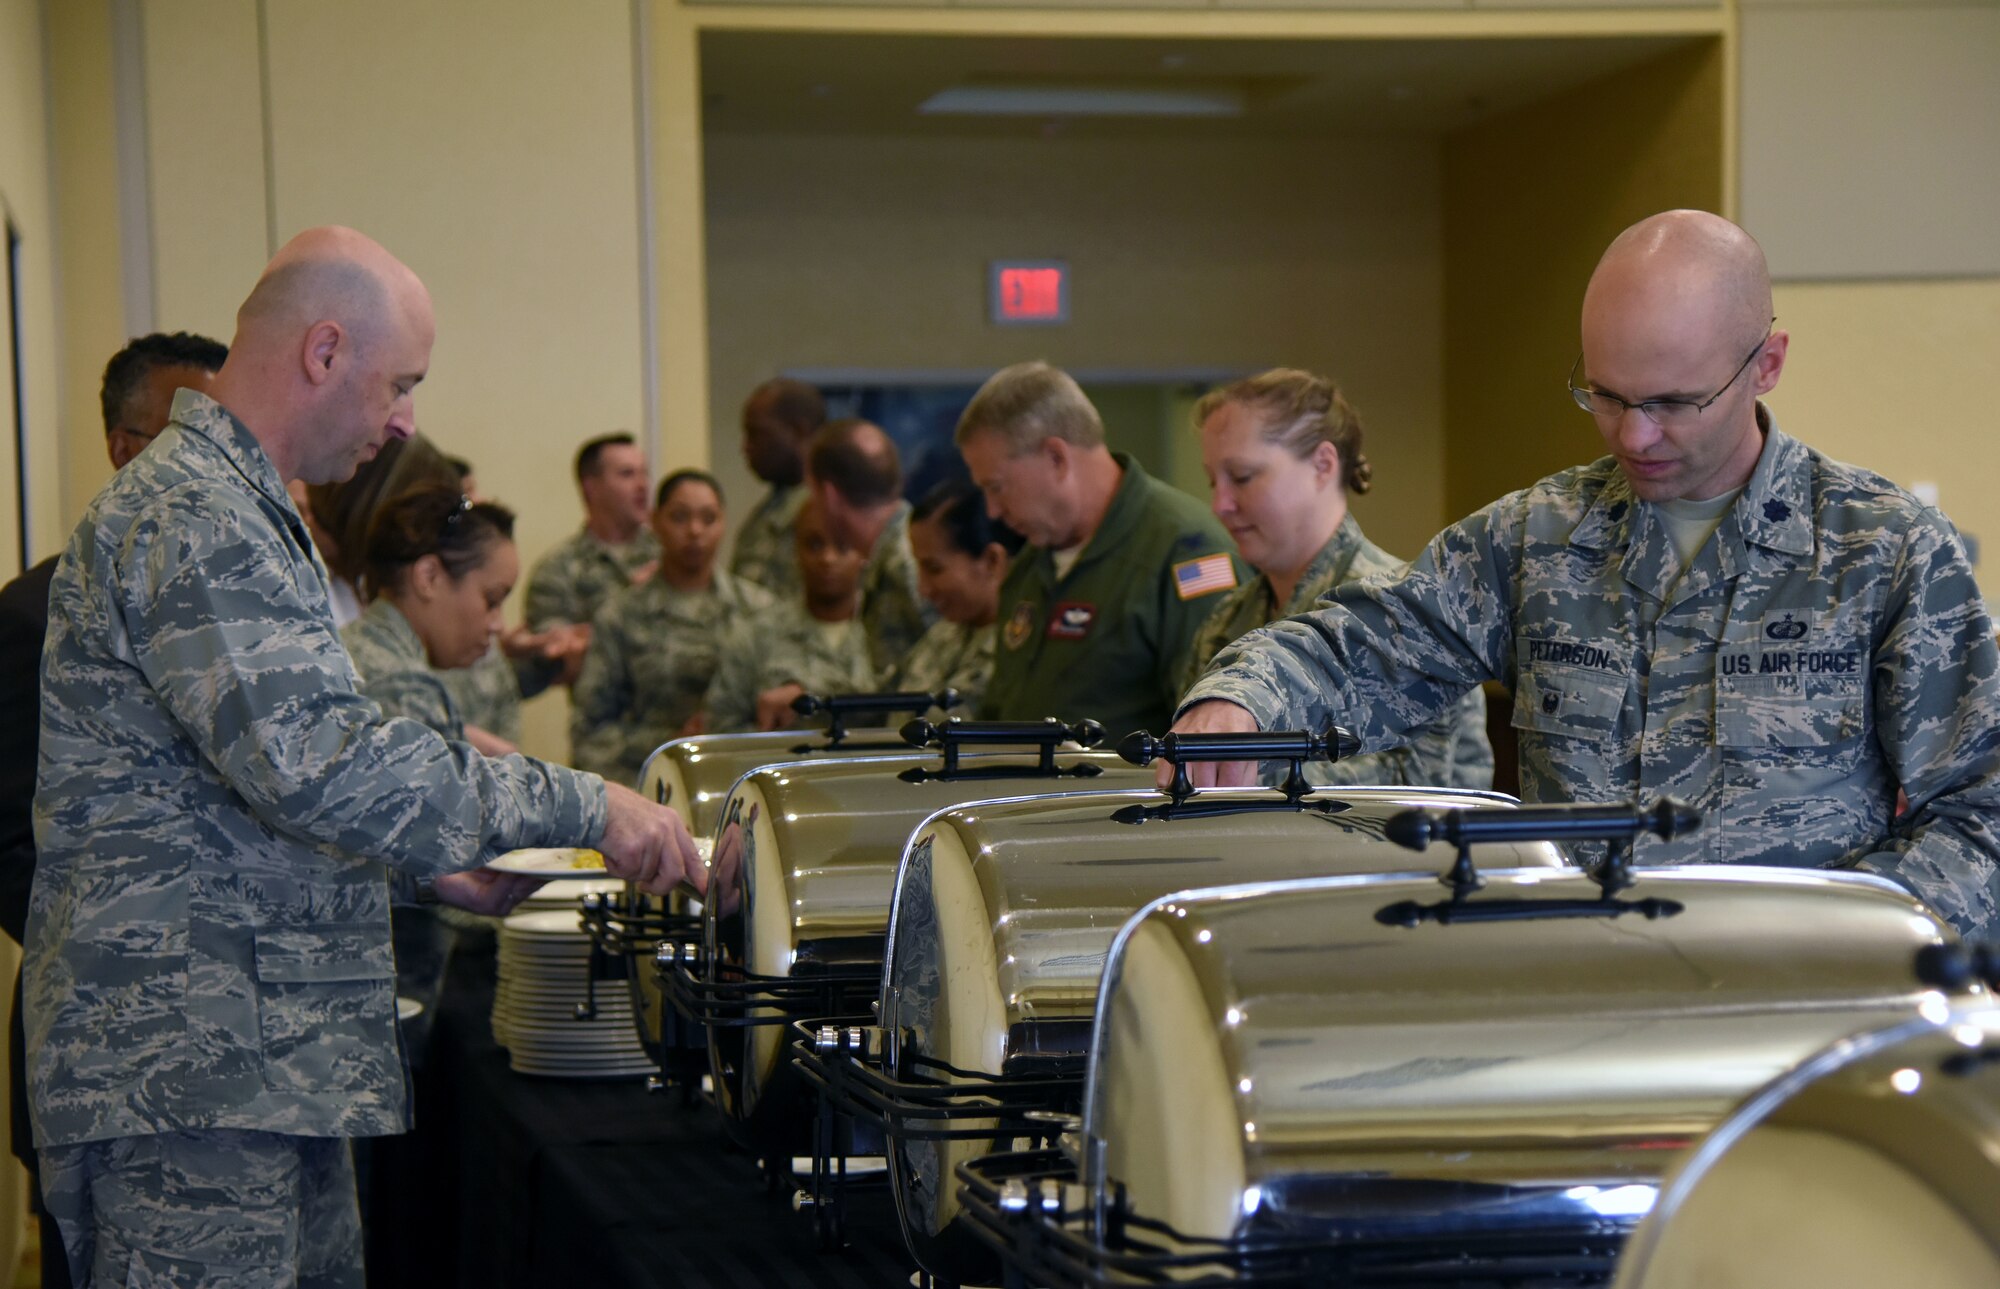 Keesler personnel get food during the Women’s History Month Luncheon at the Bay Breeze Event Center March 27, 2018, on Keesler Air Force Base, Mississippi. The theme for this year’s event is “Nevertheless She Persisted.” (U.S. Air Force photo by Kemberly Groue)